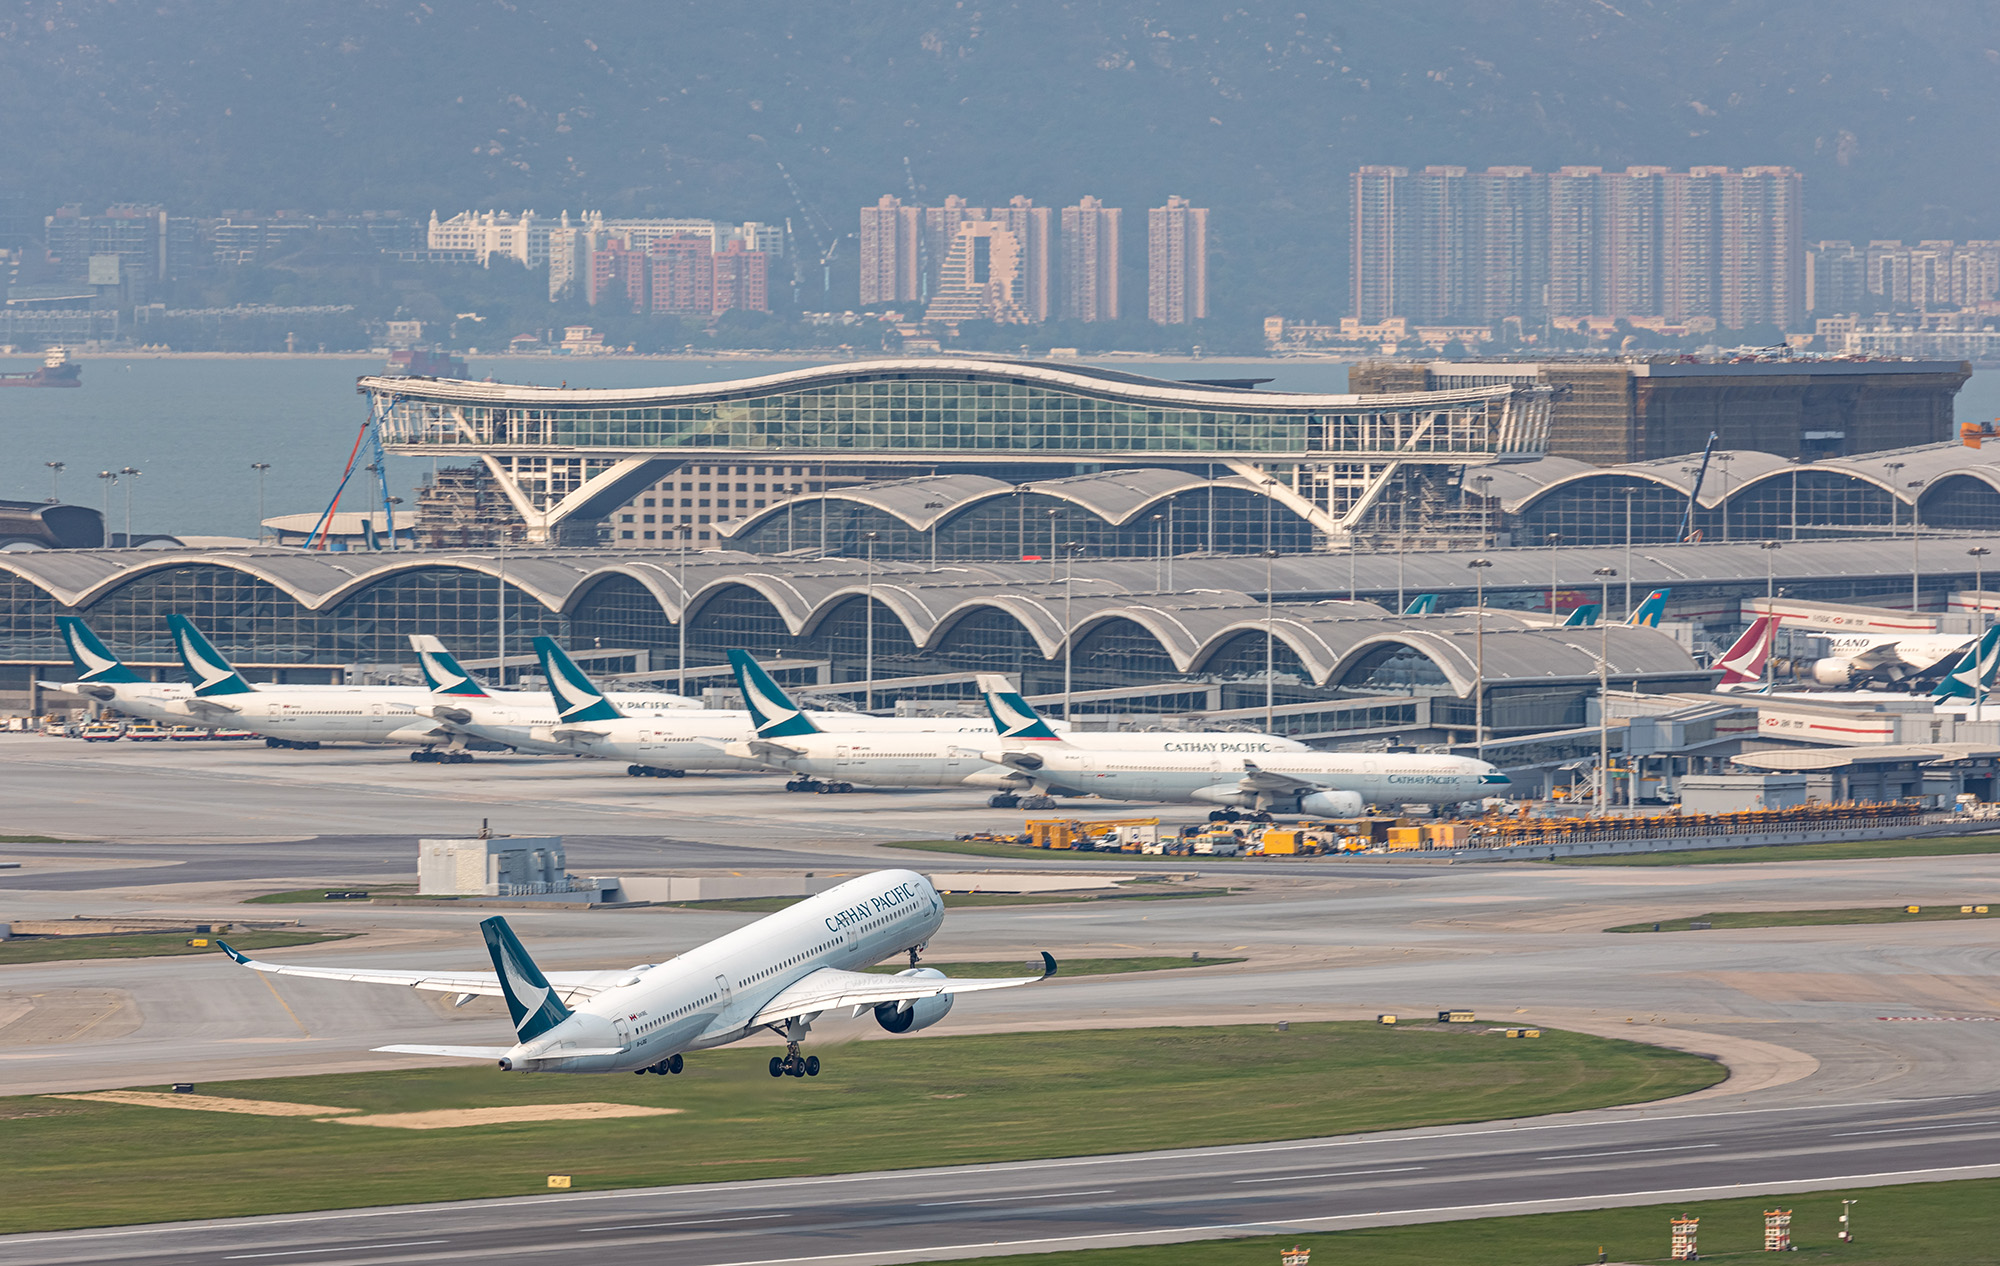 Cathay Pacific's Passenger airplane is running for take off at runway